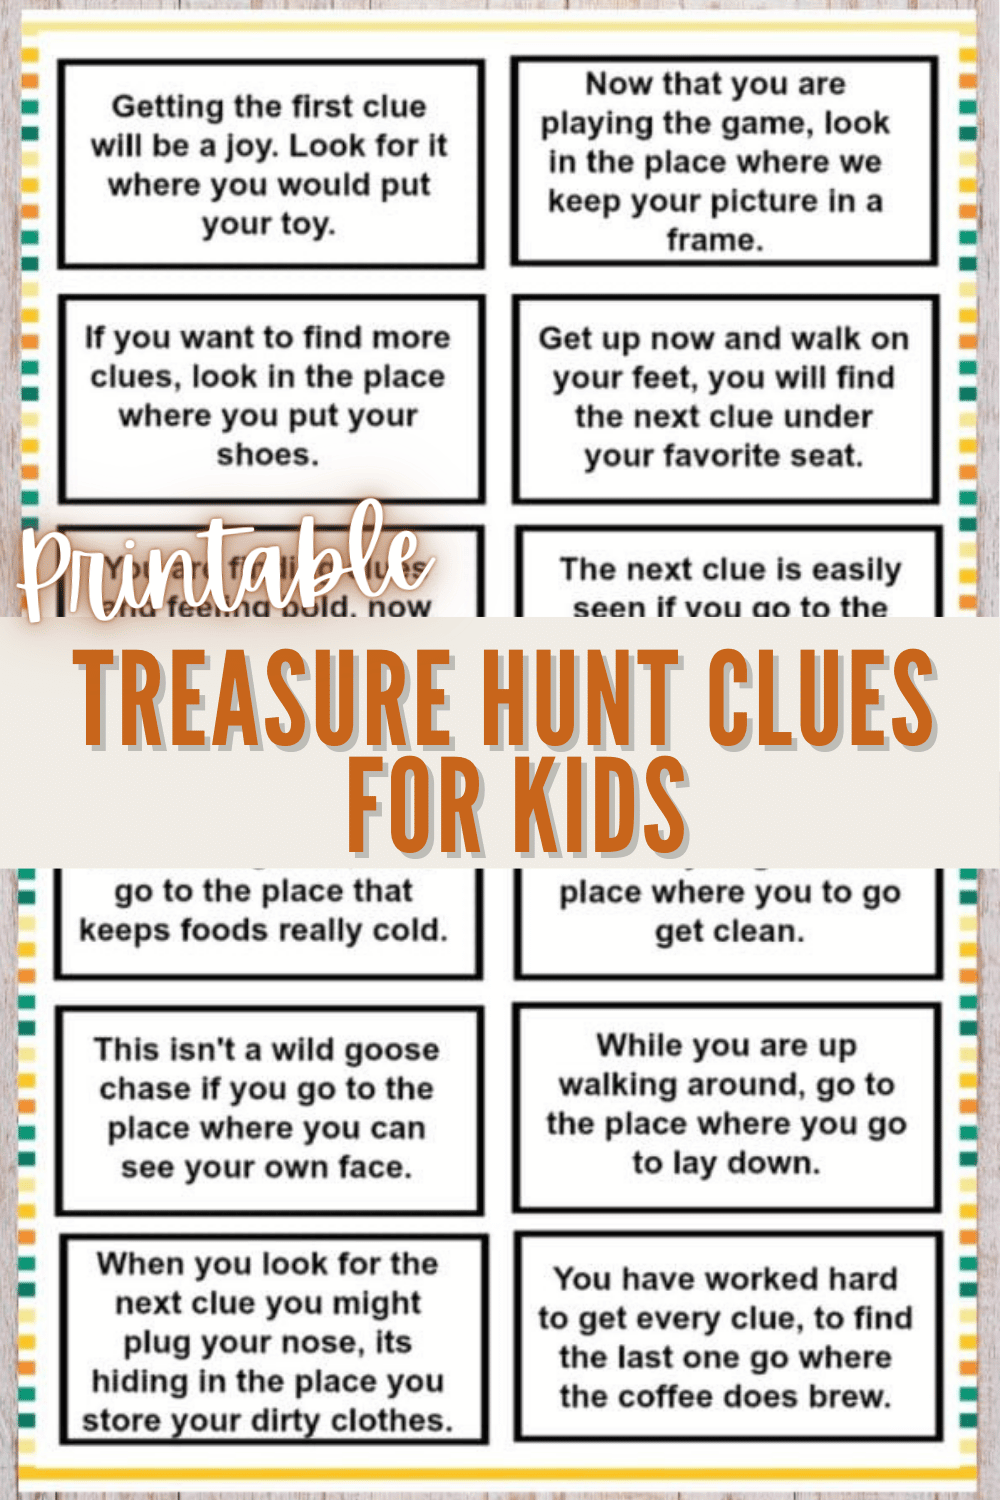 These printable treasure hunt clues for kids are a fun and easy kids activity. The clues are great for any family to use for a fun family activity. #printables #treasurehunt #kidsactivities via @wondermomwannab